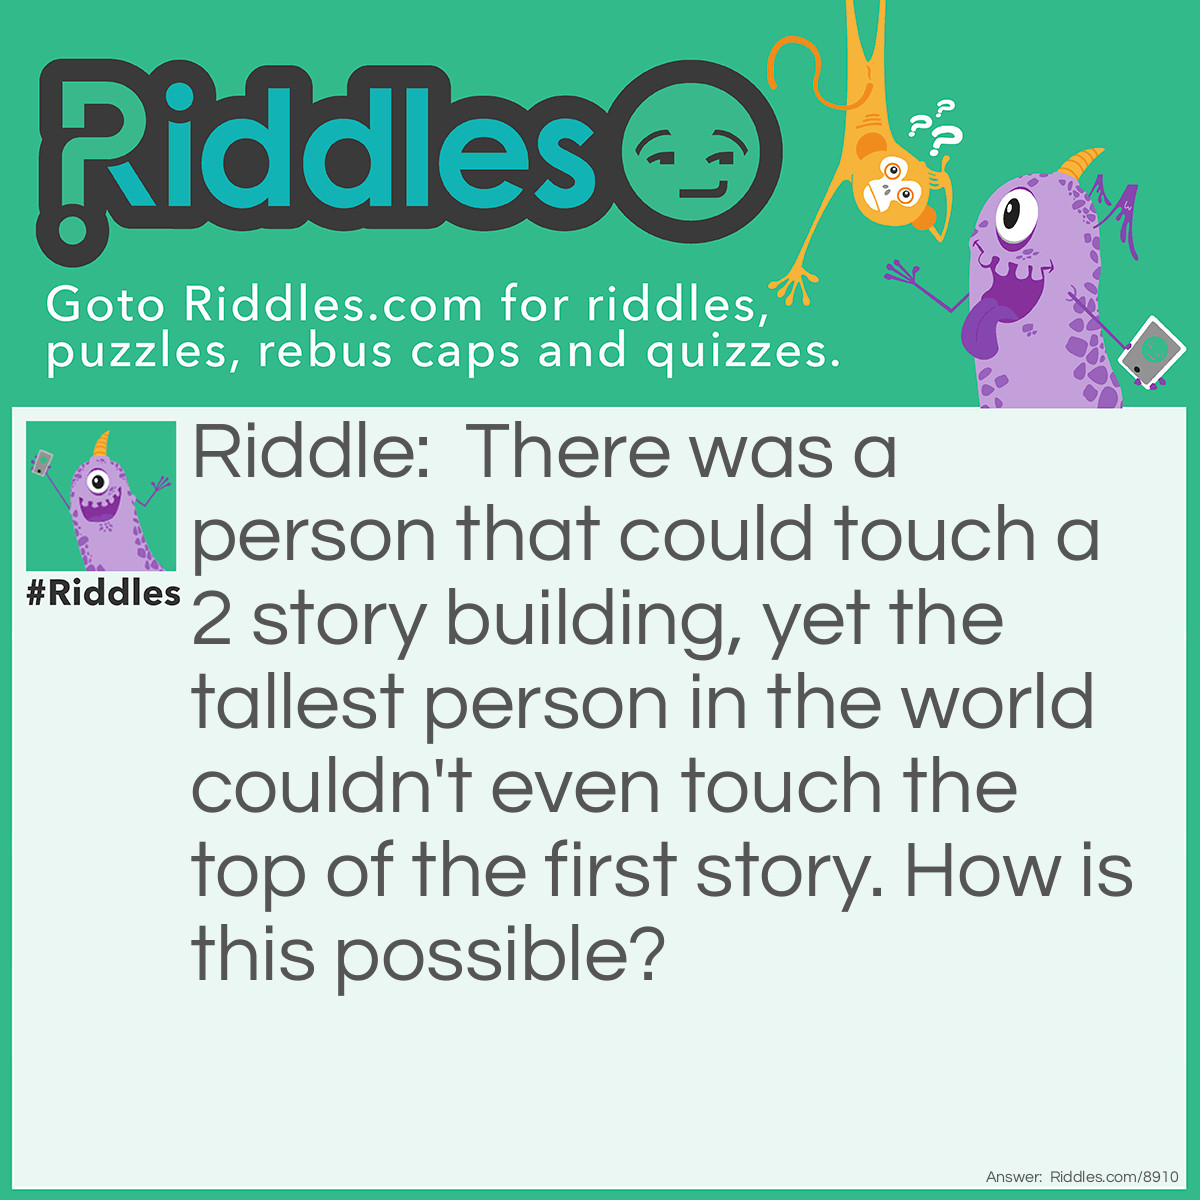 Riddle: There was a person that could touch a 2 story building, yet the tallest person in the world couldn't even touch the top of the first story. How is this possible? Answer: It was a giraffe, not a person and the giraffe's name is a person.